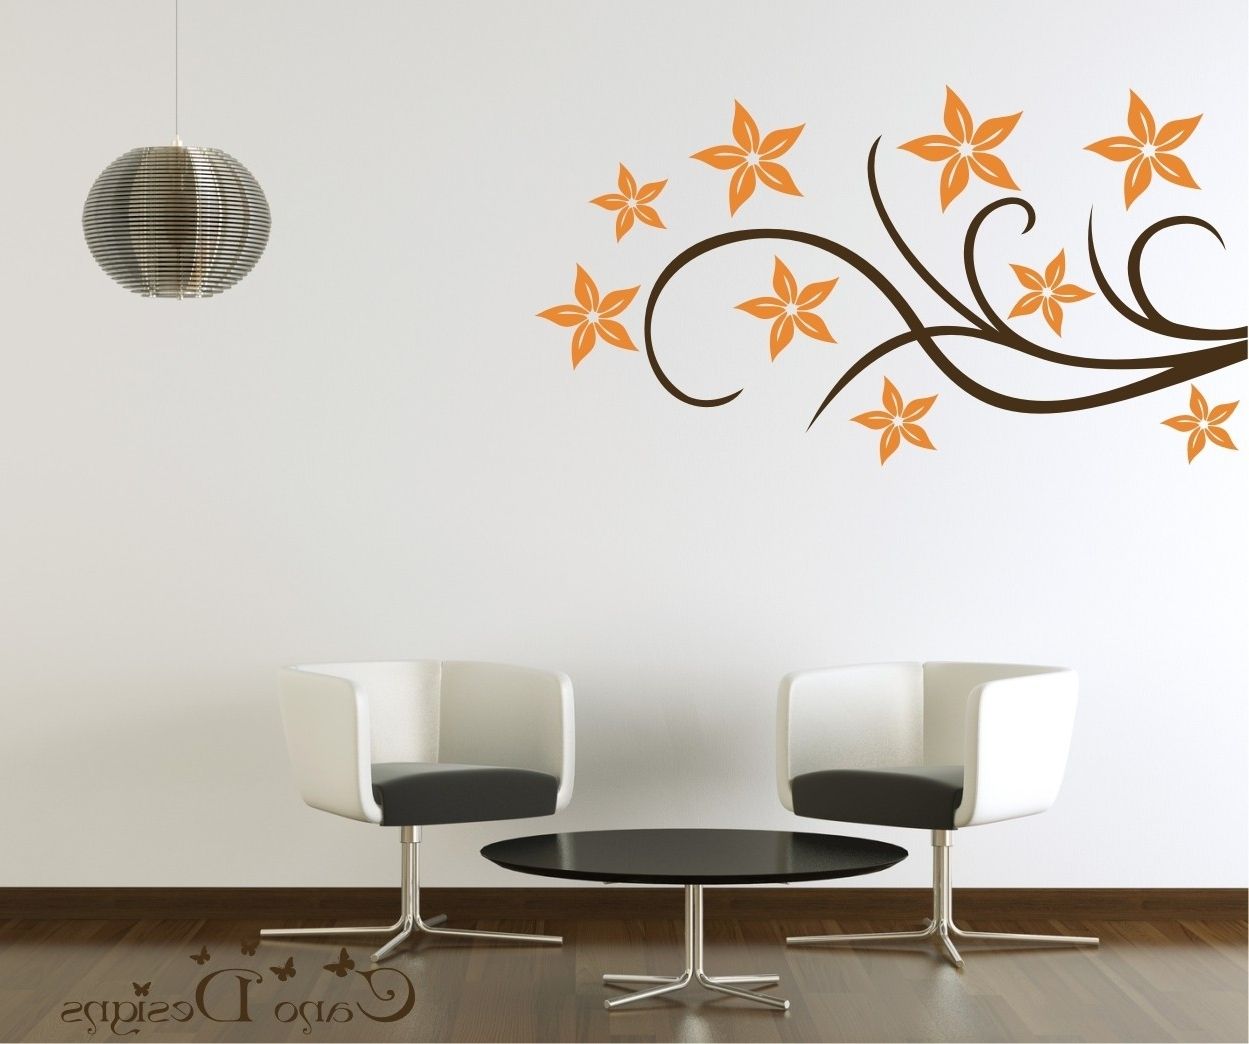 Wall Art Deco Decals Intended For Trendy Paints : Wall Decal About Art Together With Wall Decal Article (View 3 of 15)